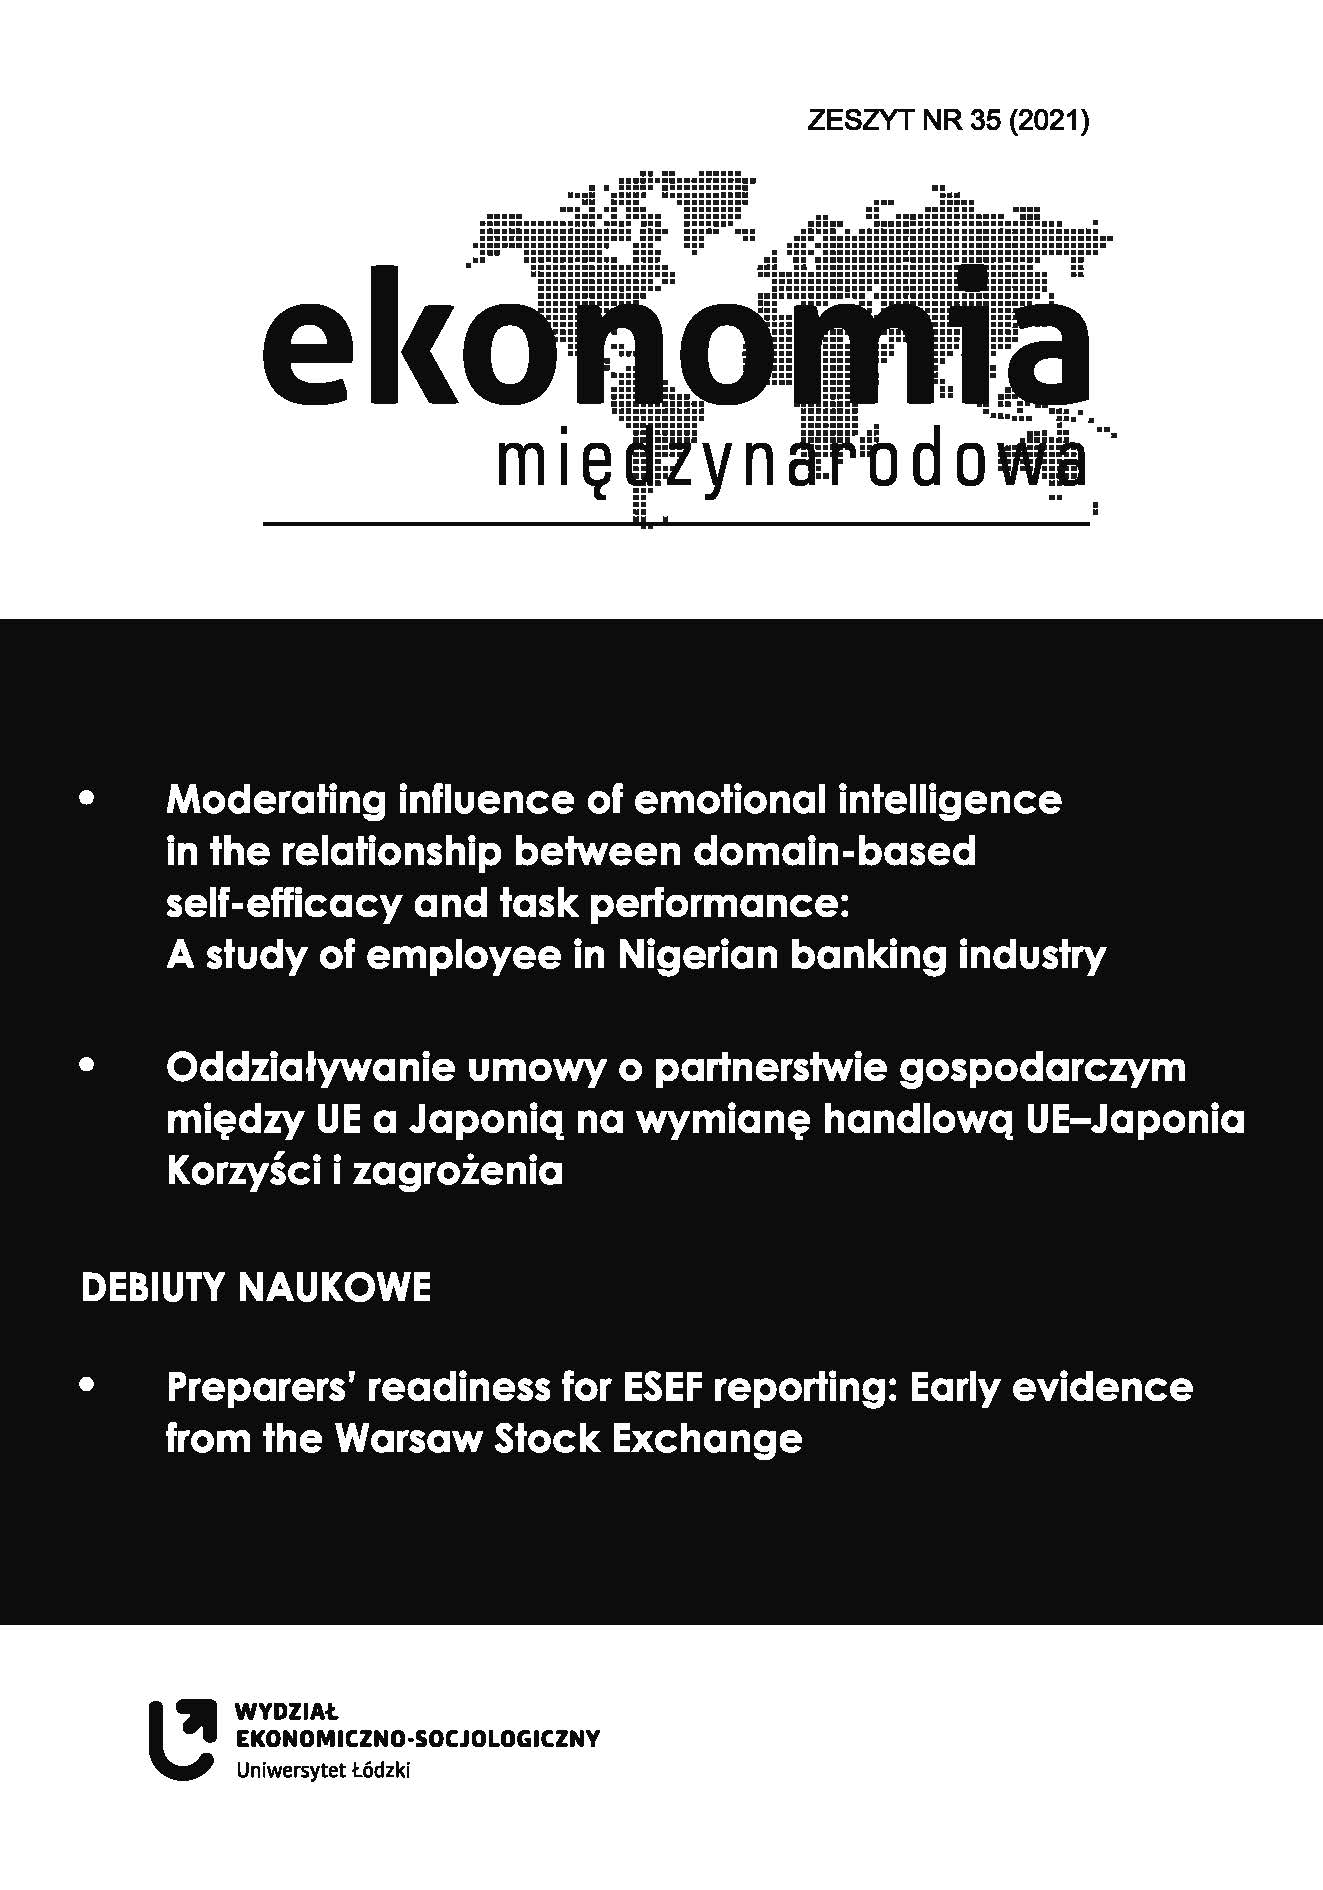 Preparers’ readiness for ESEF reporting: Early evidence from the Warsaw Stock Exchange Cover Image